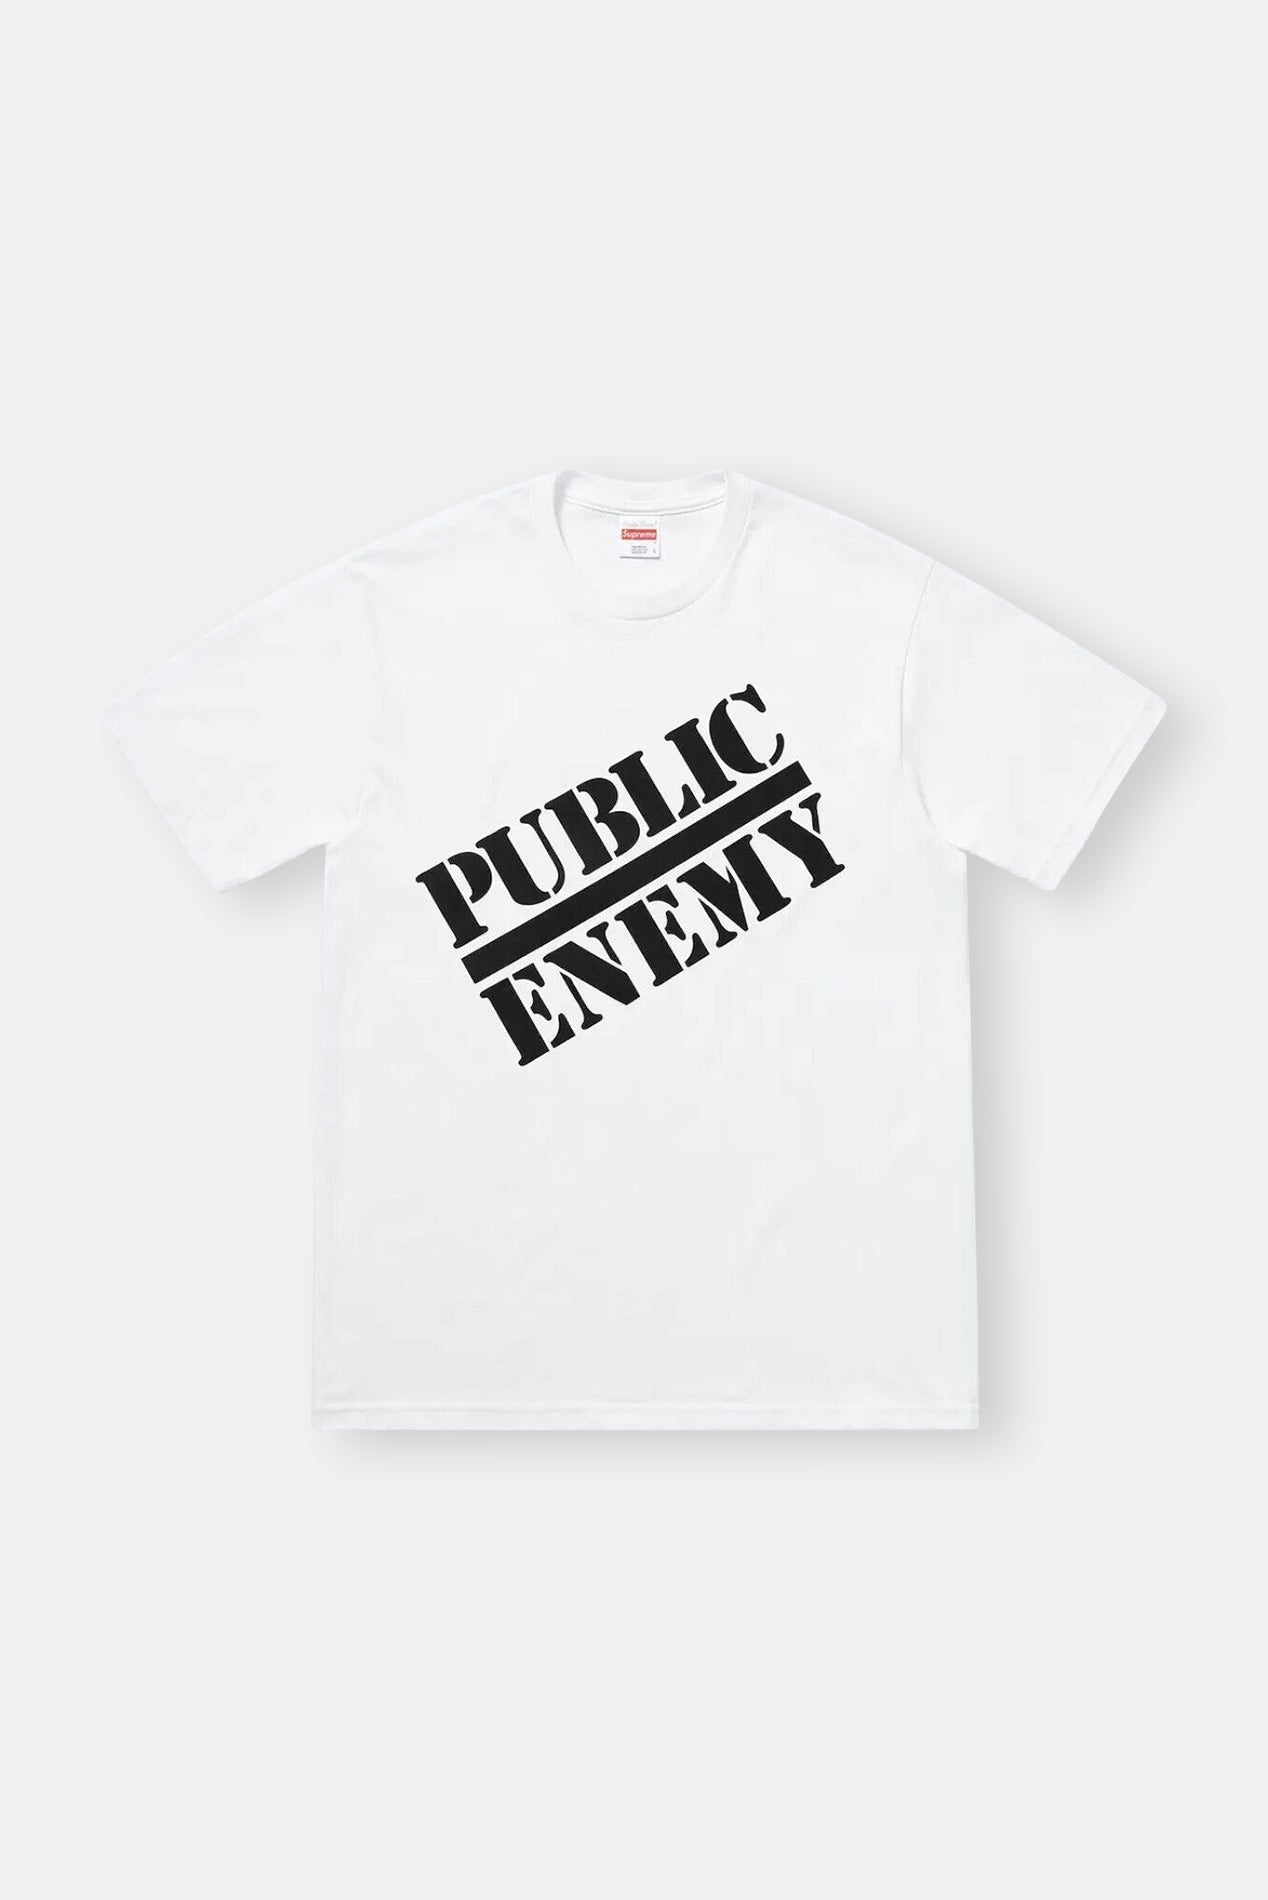 Supreme x Undercover Public Enemy Blow Your Mind Tee White